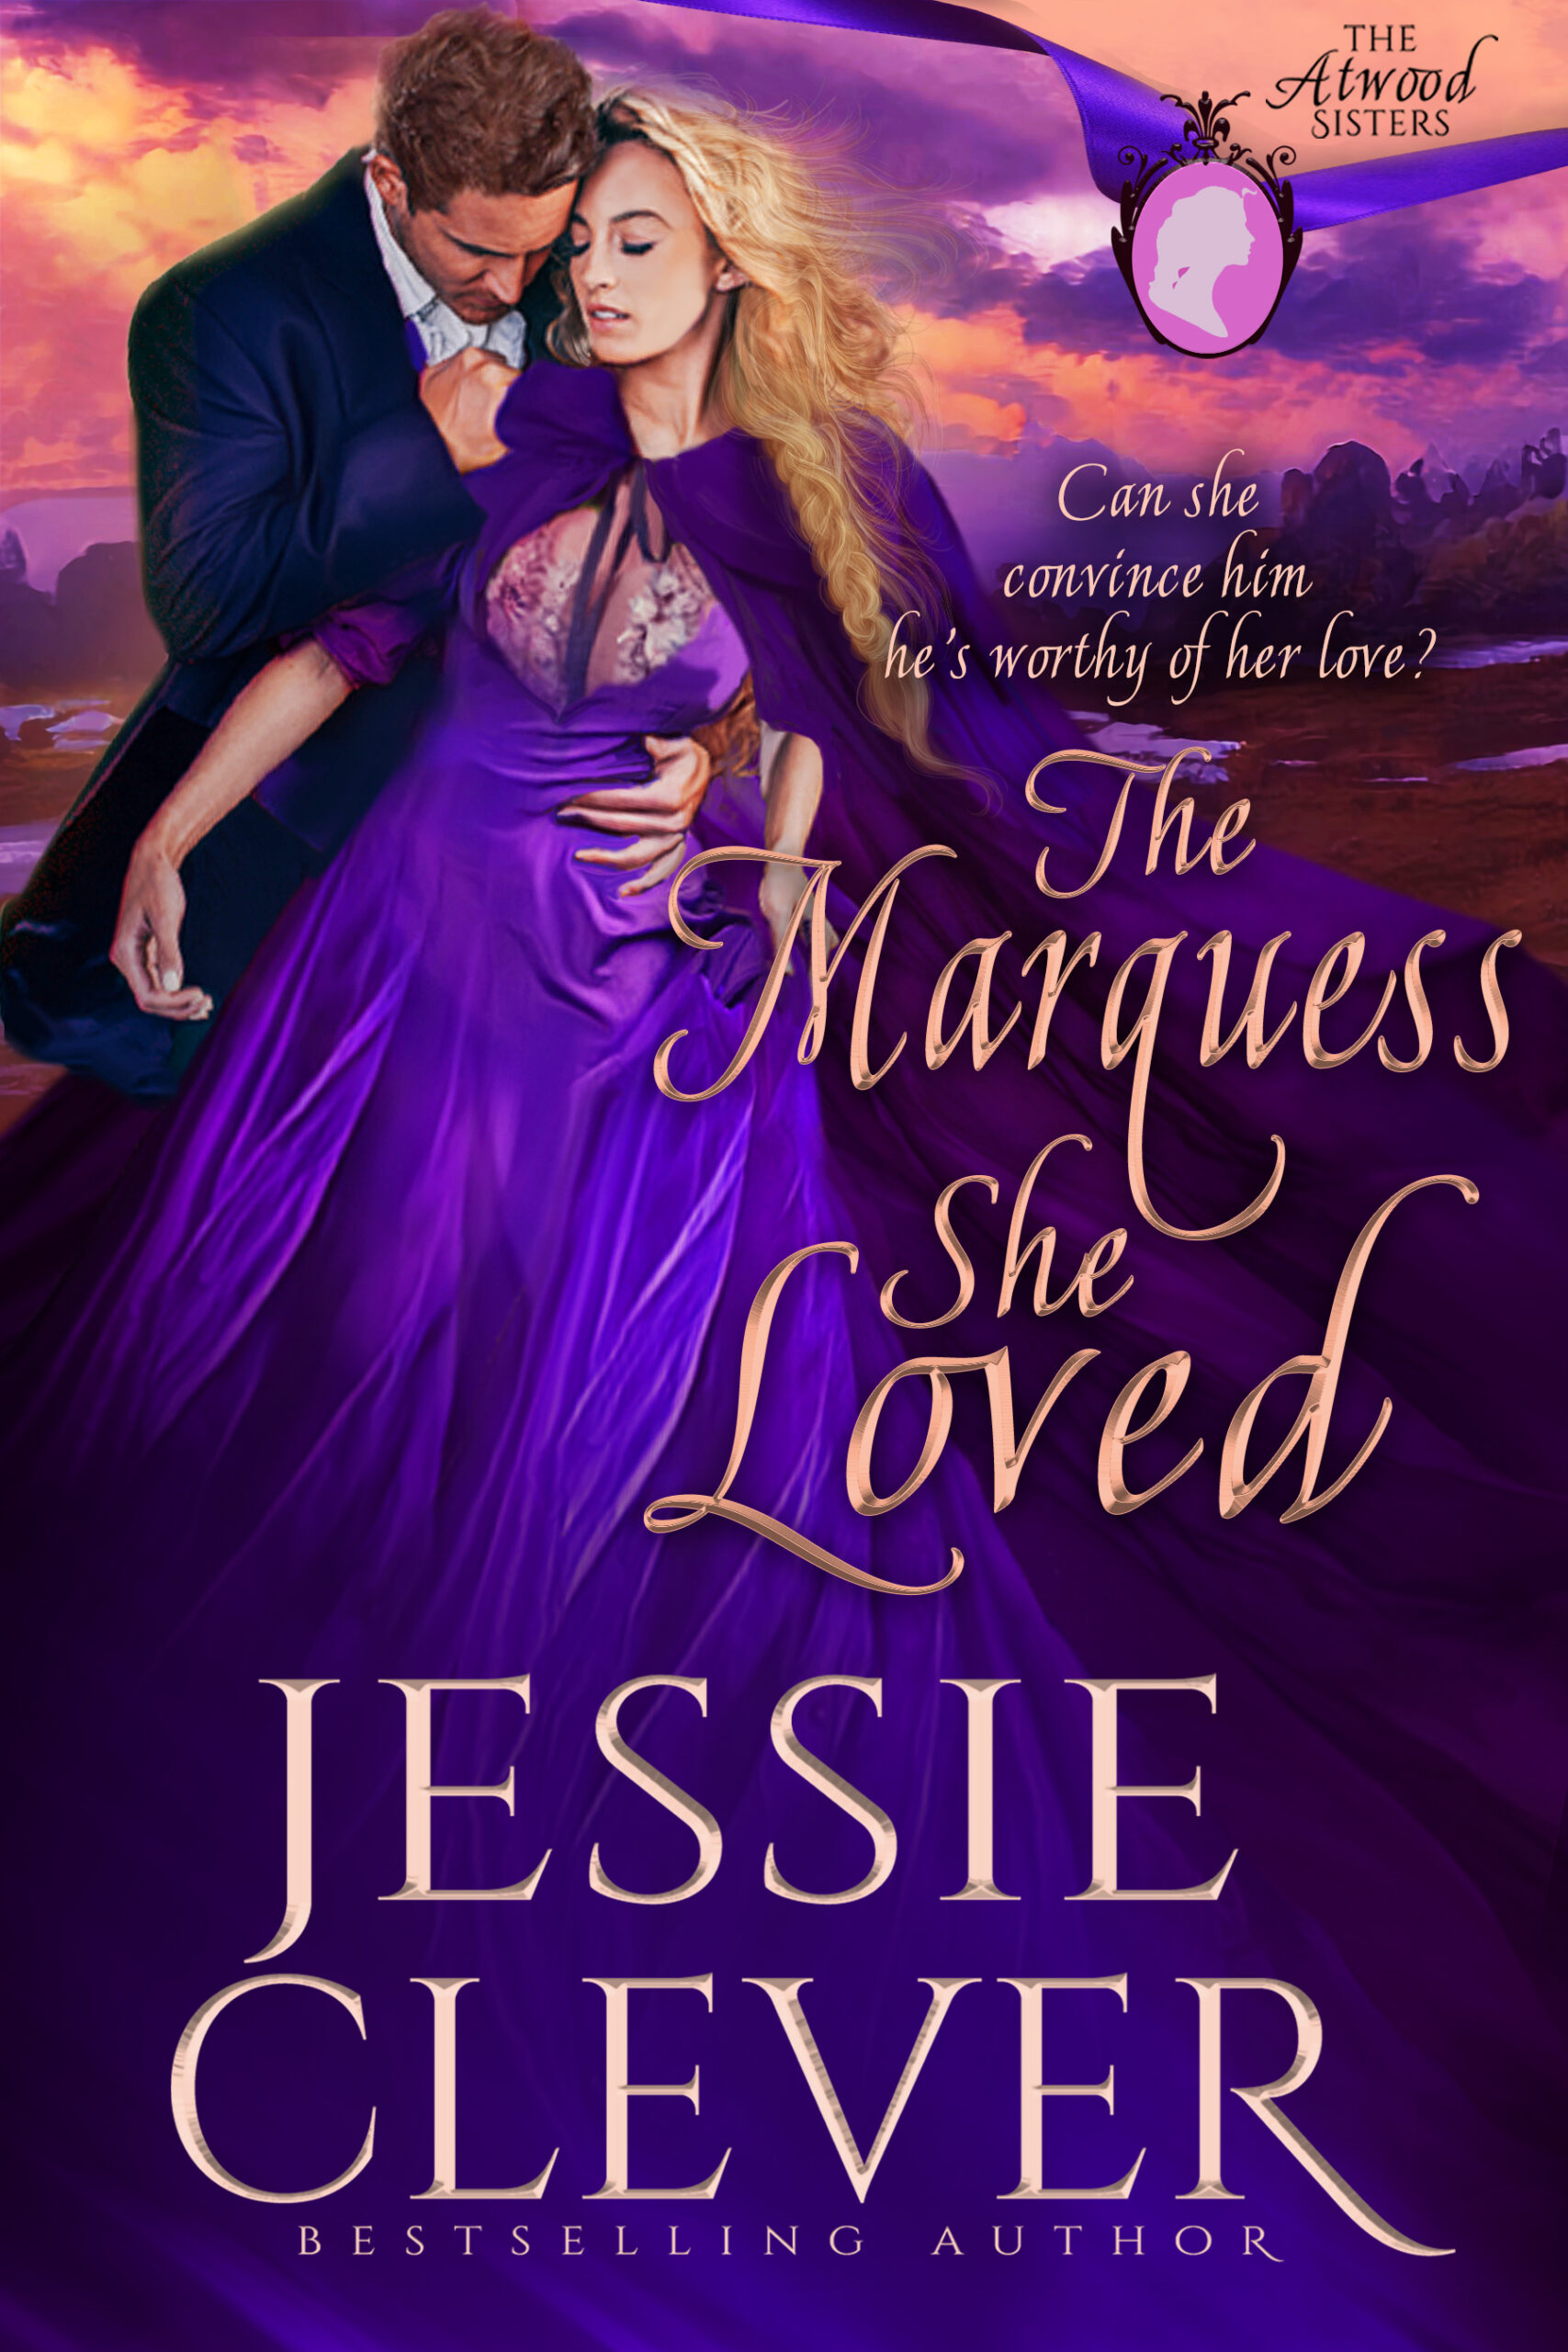 Enjoy an Excerpt from The Marquess She Loved